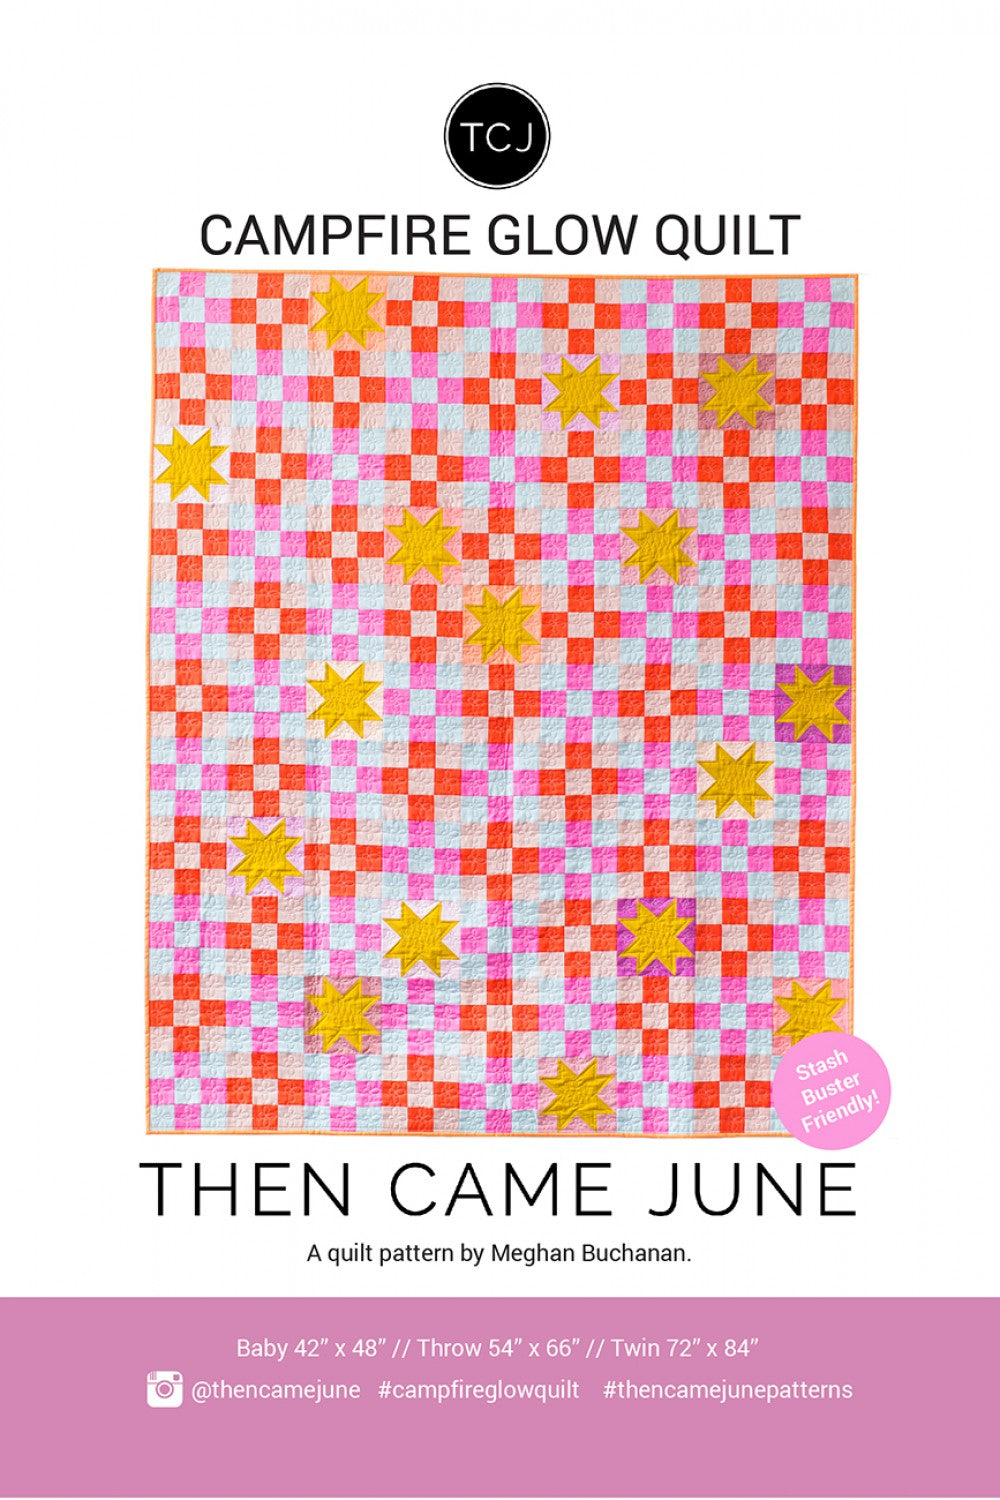 Campfire Glow Quilt by Then Came June